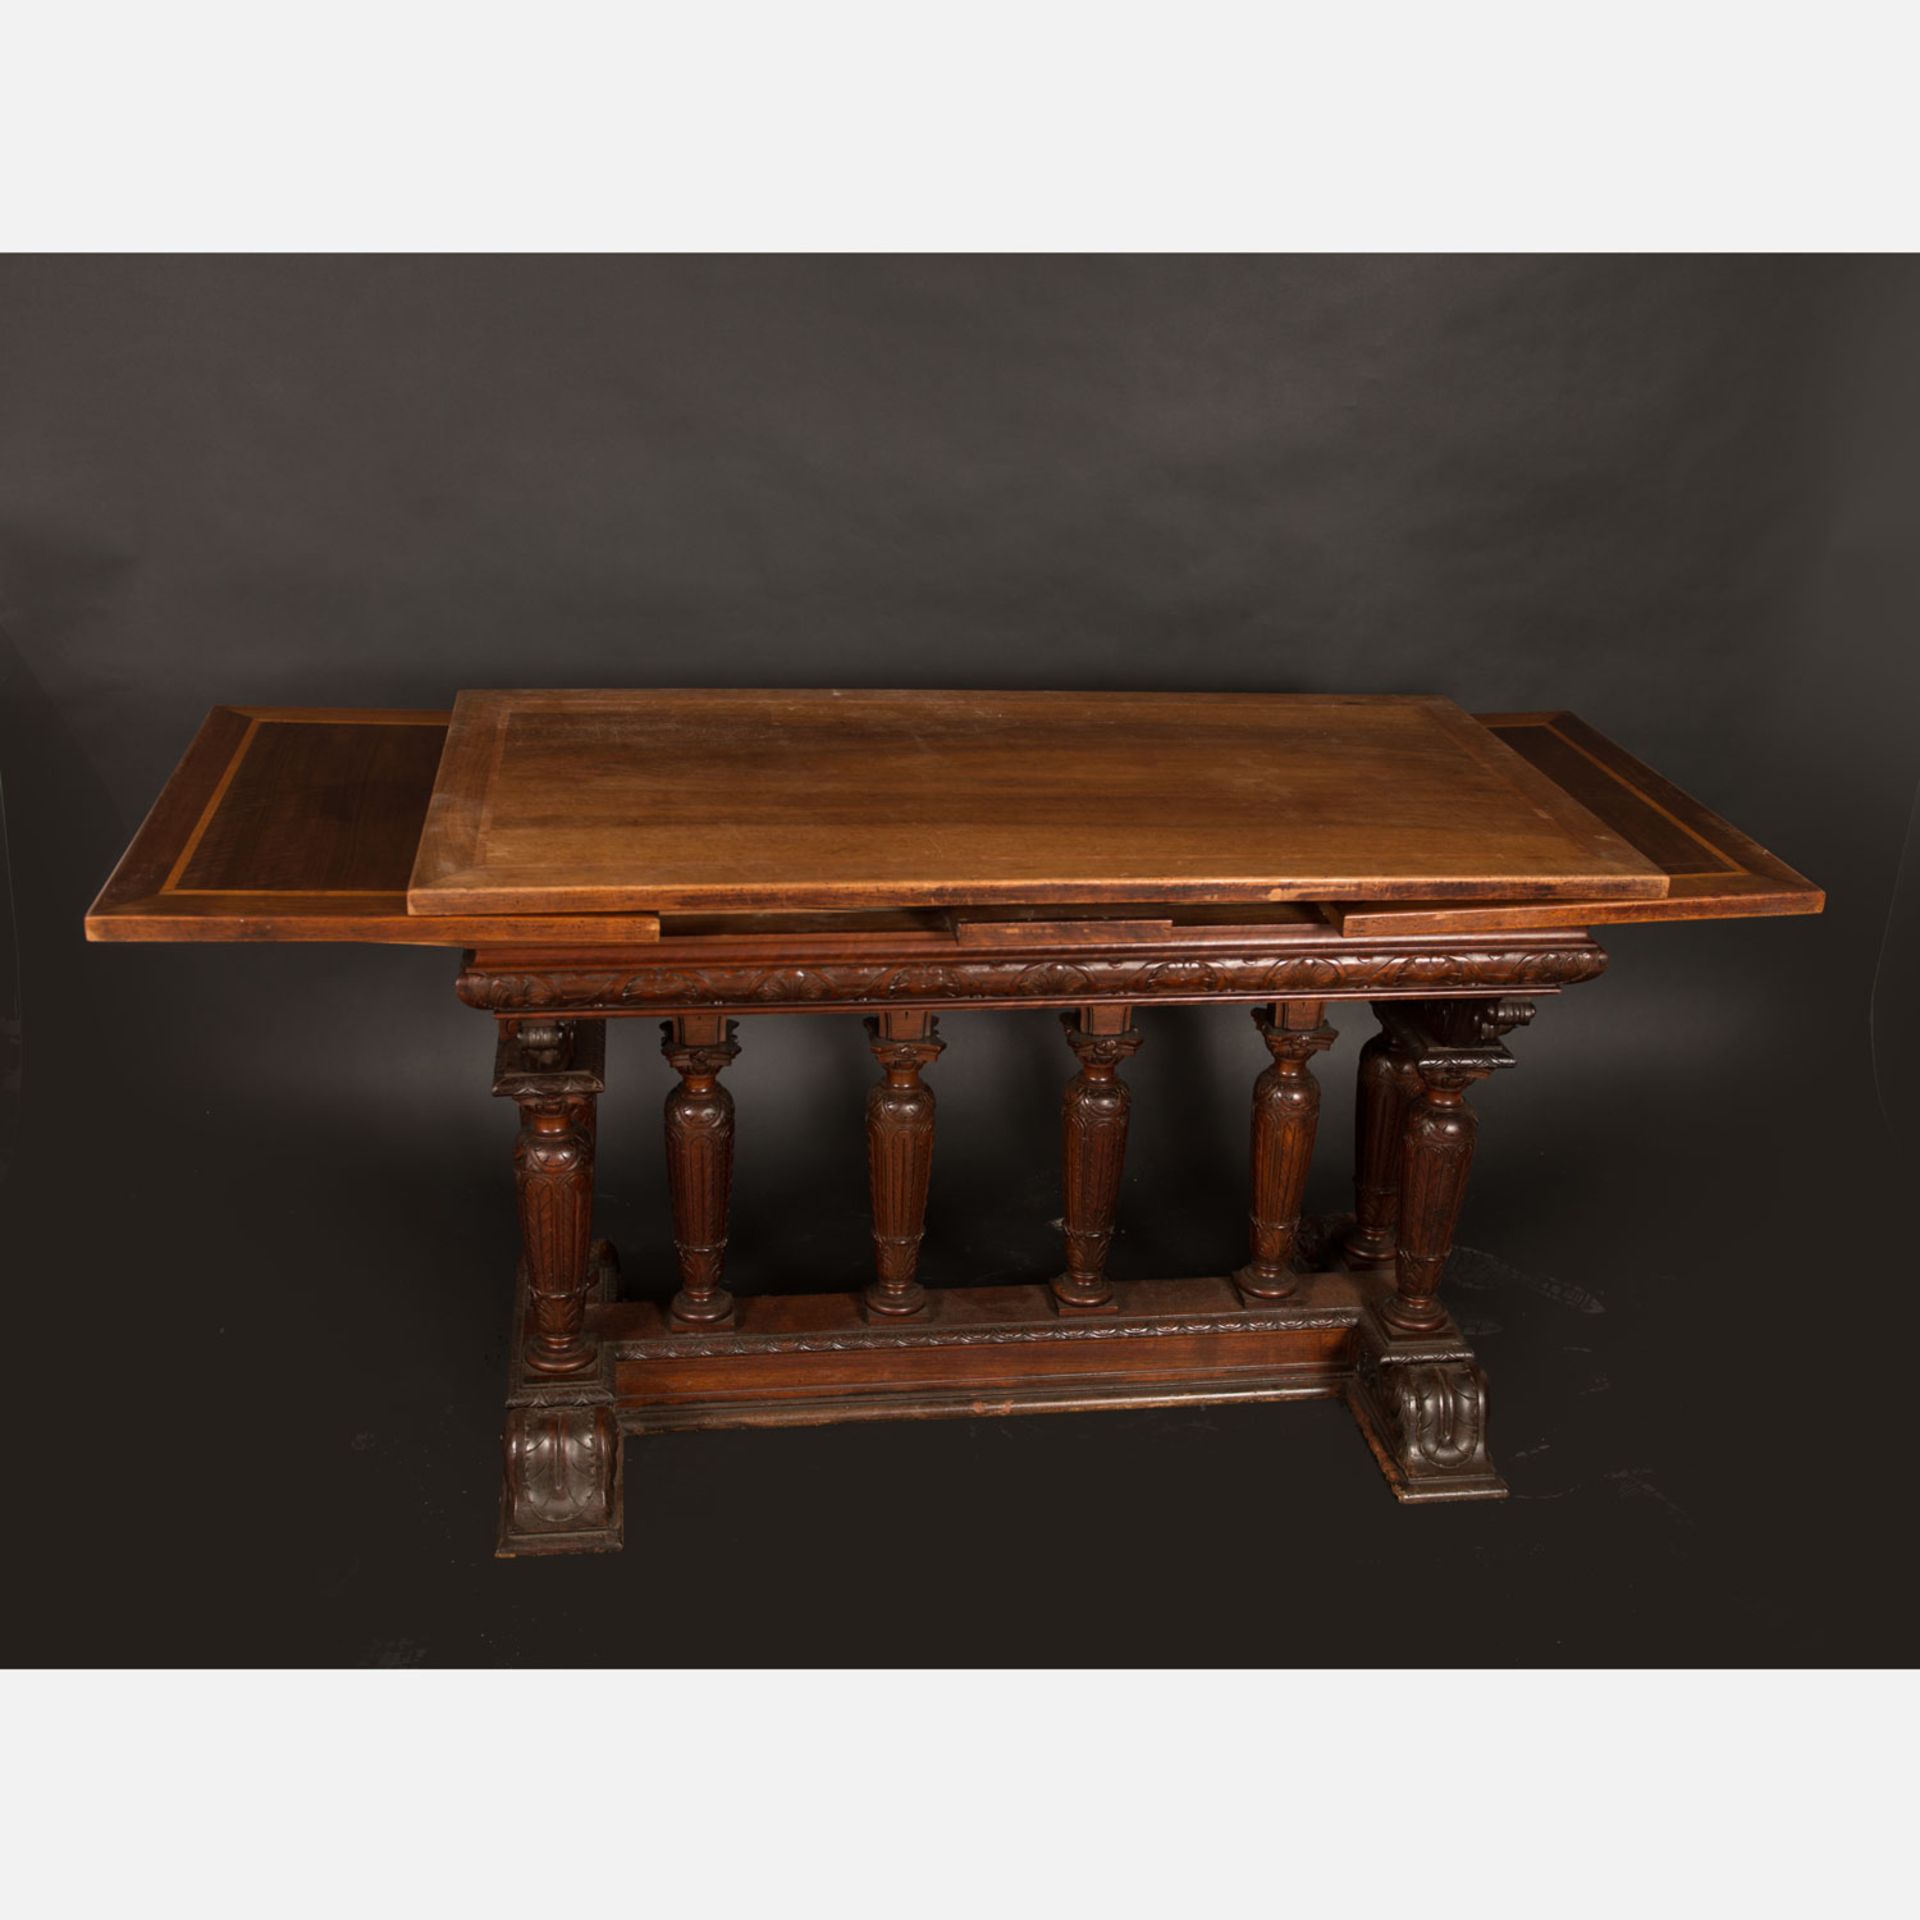 Expanable hall table in Renaissance manner - Image 3 of 3